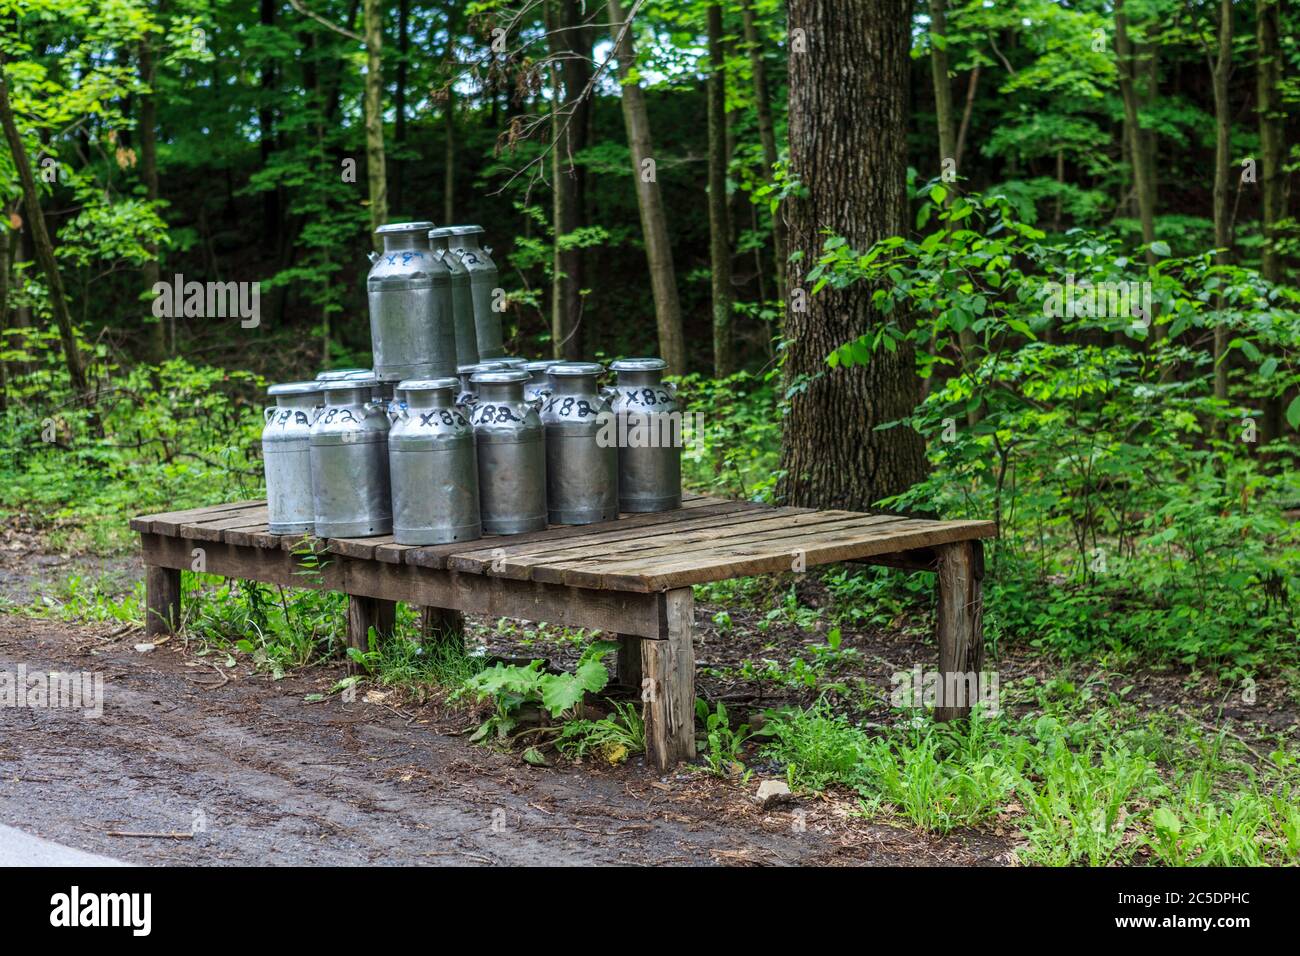 Bellville, PA, USA - May 23, 2013: Milk cans on a loading platform ready for pick up from an Amish farm in Kishacoquillas Valley in Mifflin County, PA Stock Photo